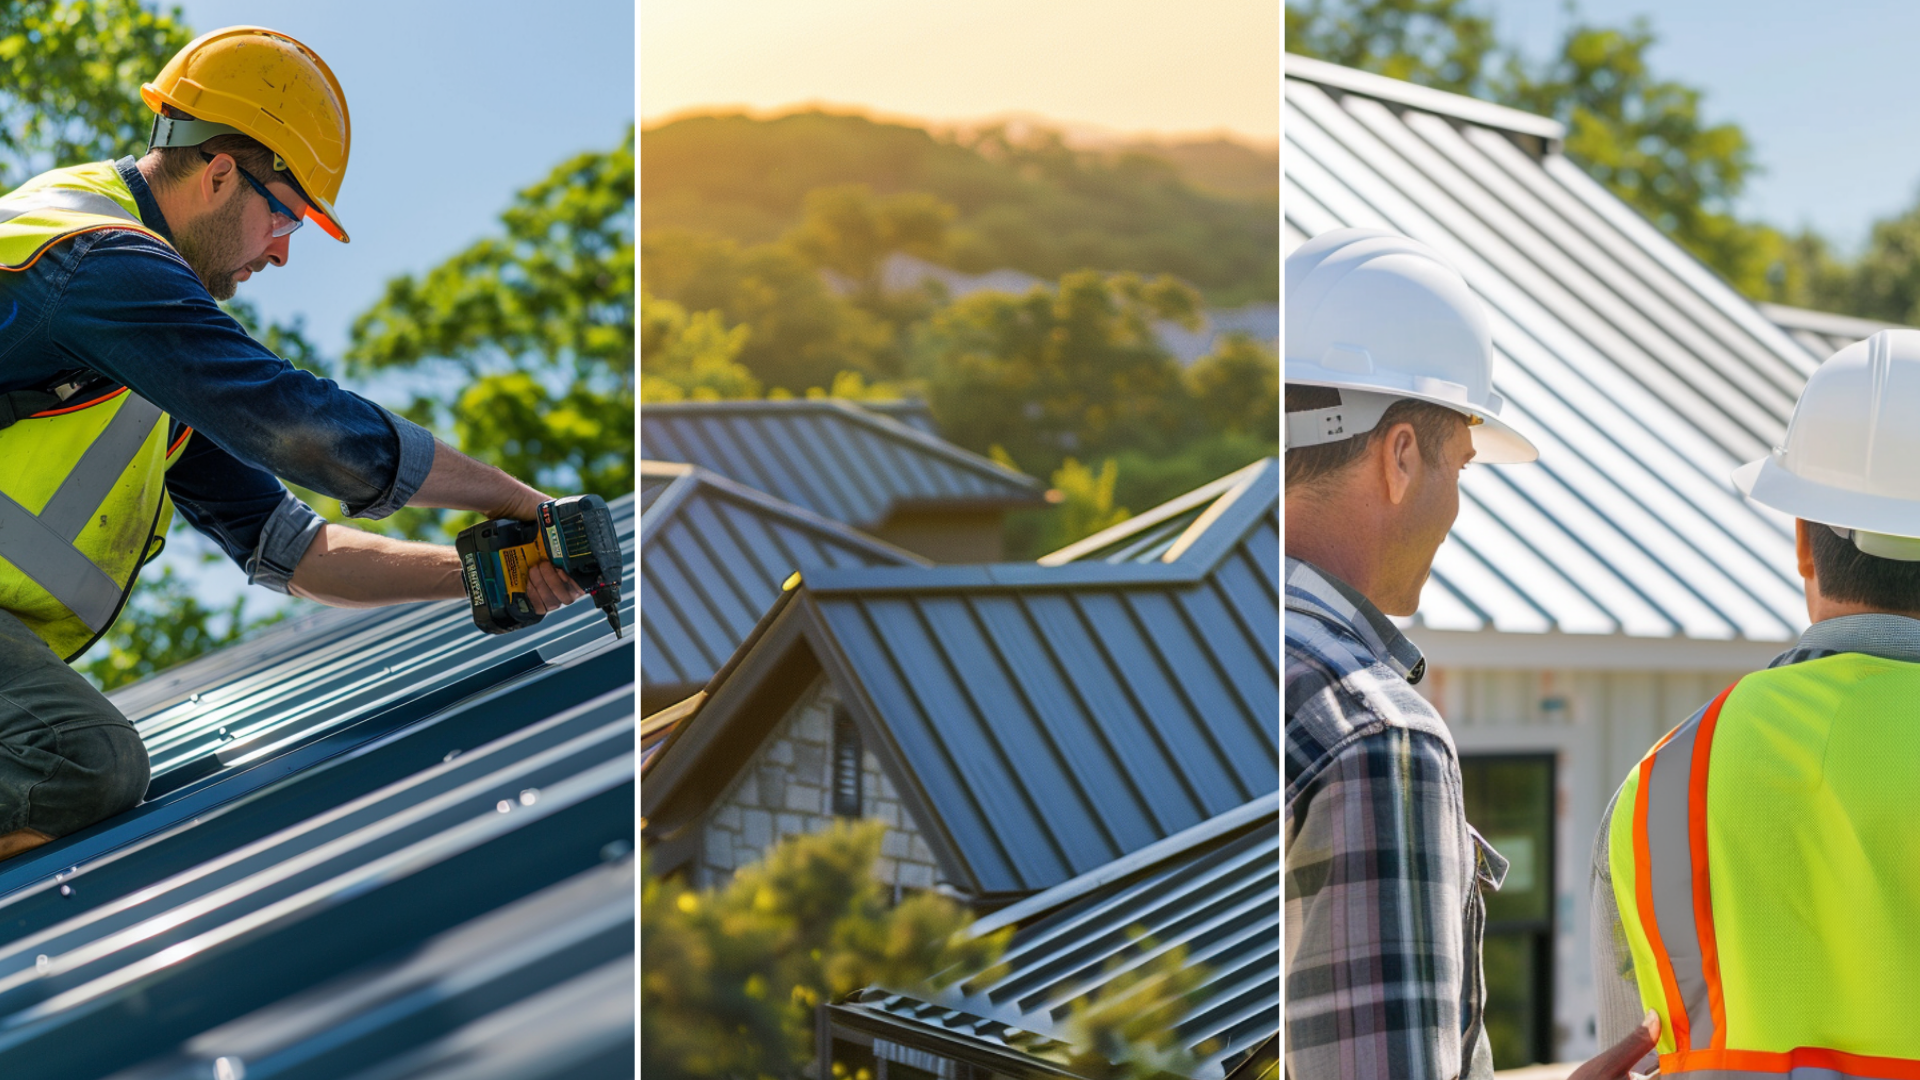 Roofer is doing a residential standing seam metal roof installation, A premium metal steel roofing on Texas homes, and<br />
Two skilled roofing contractors.